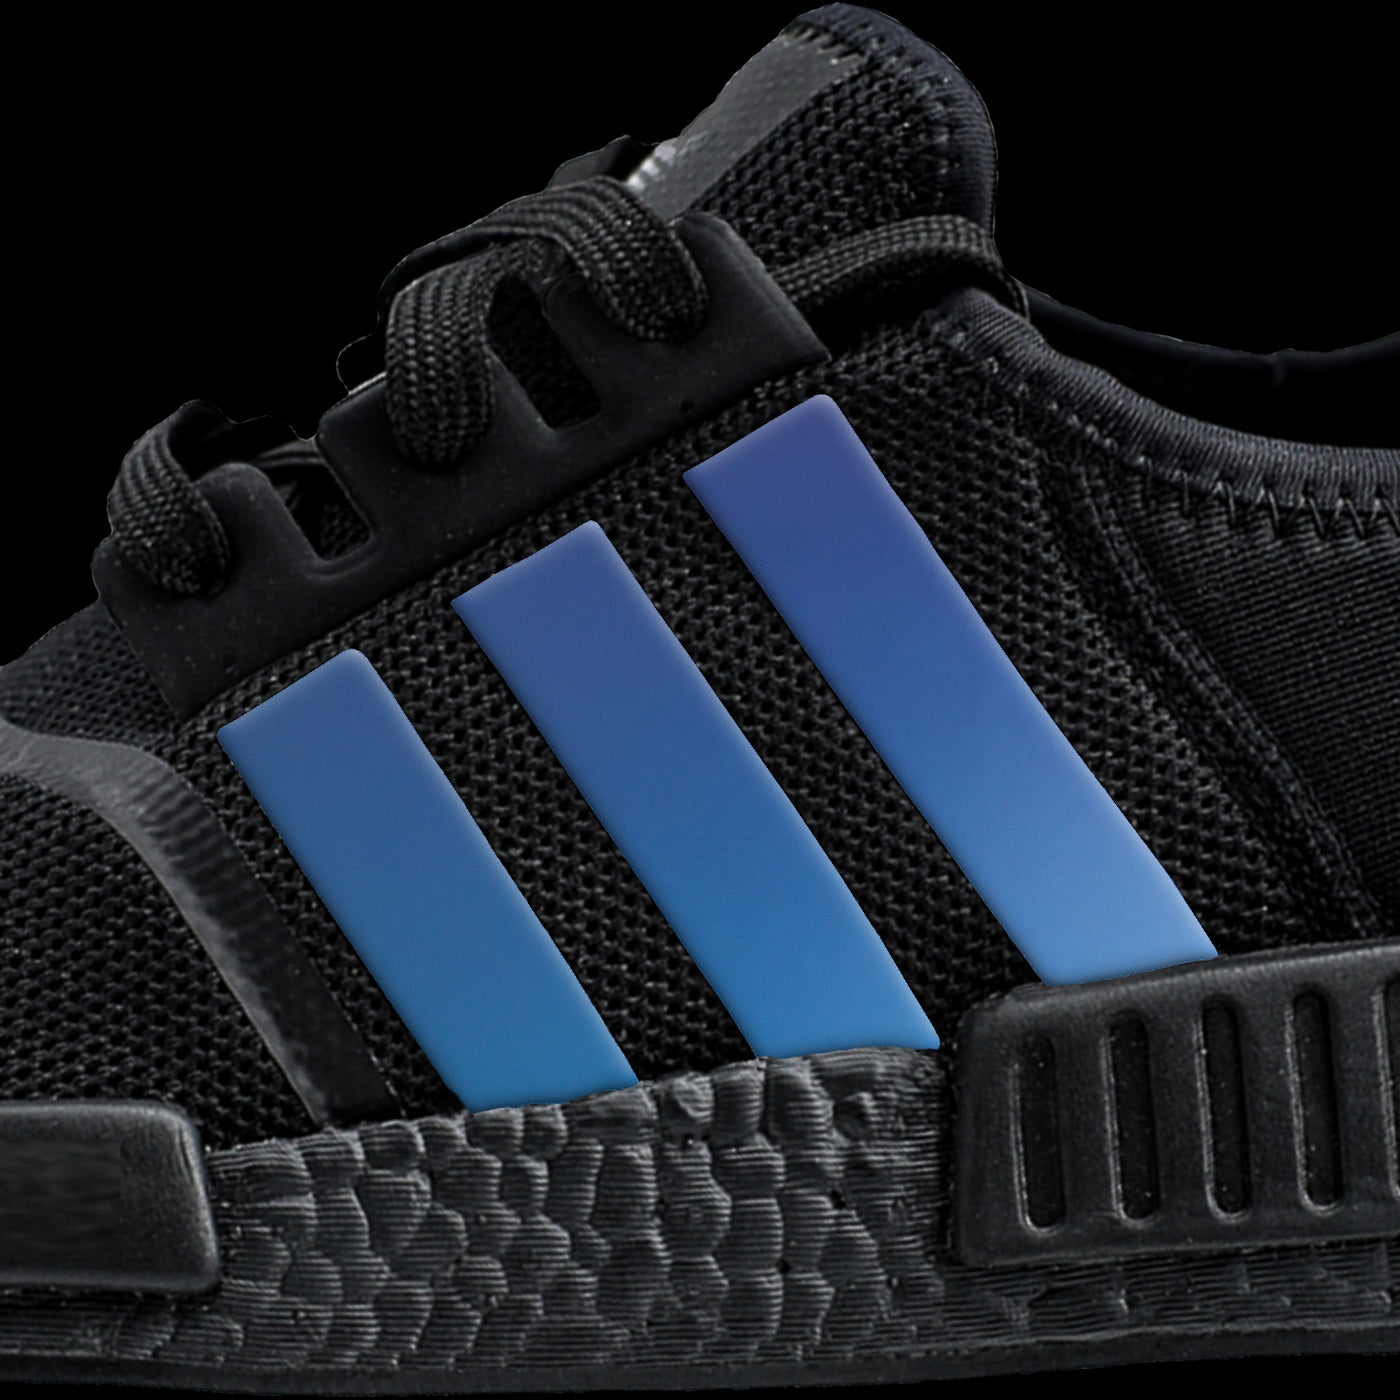 Ice Blue Color Shift Stripes for NMD